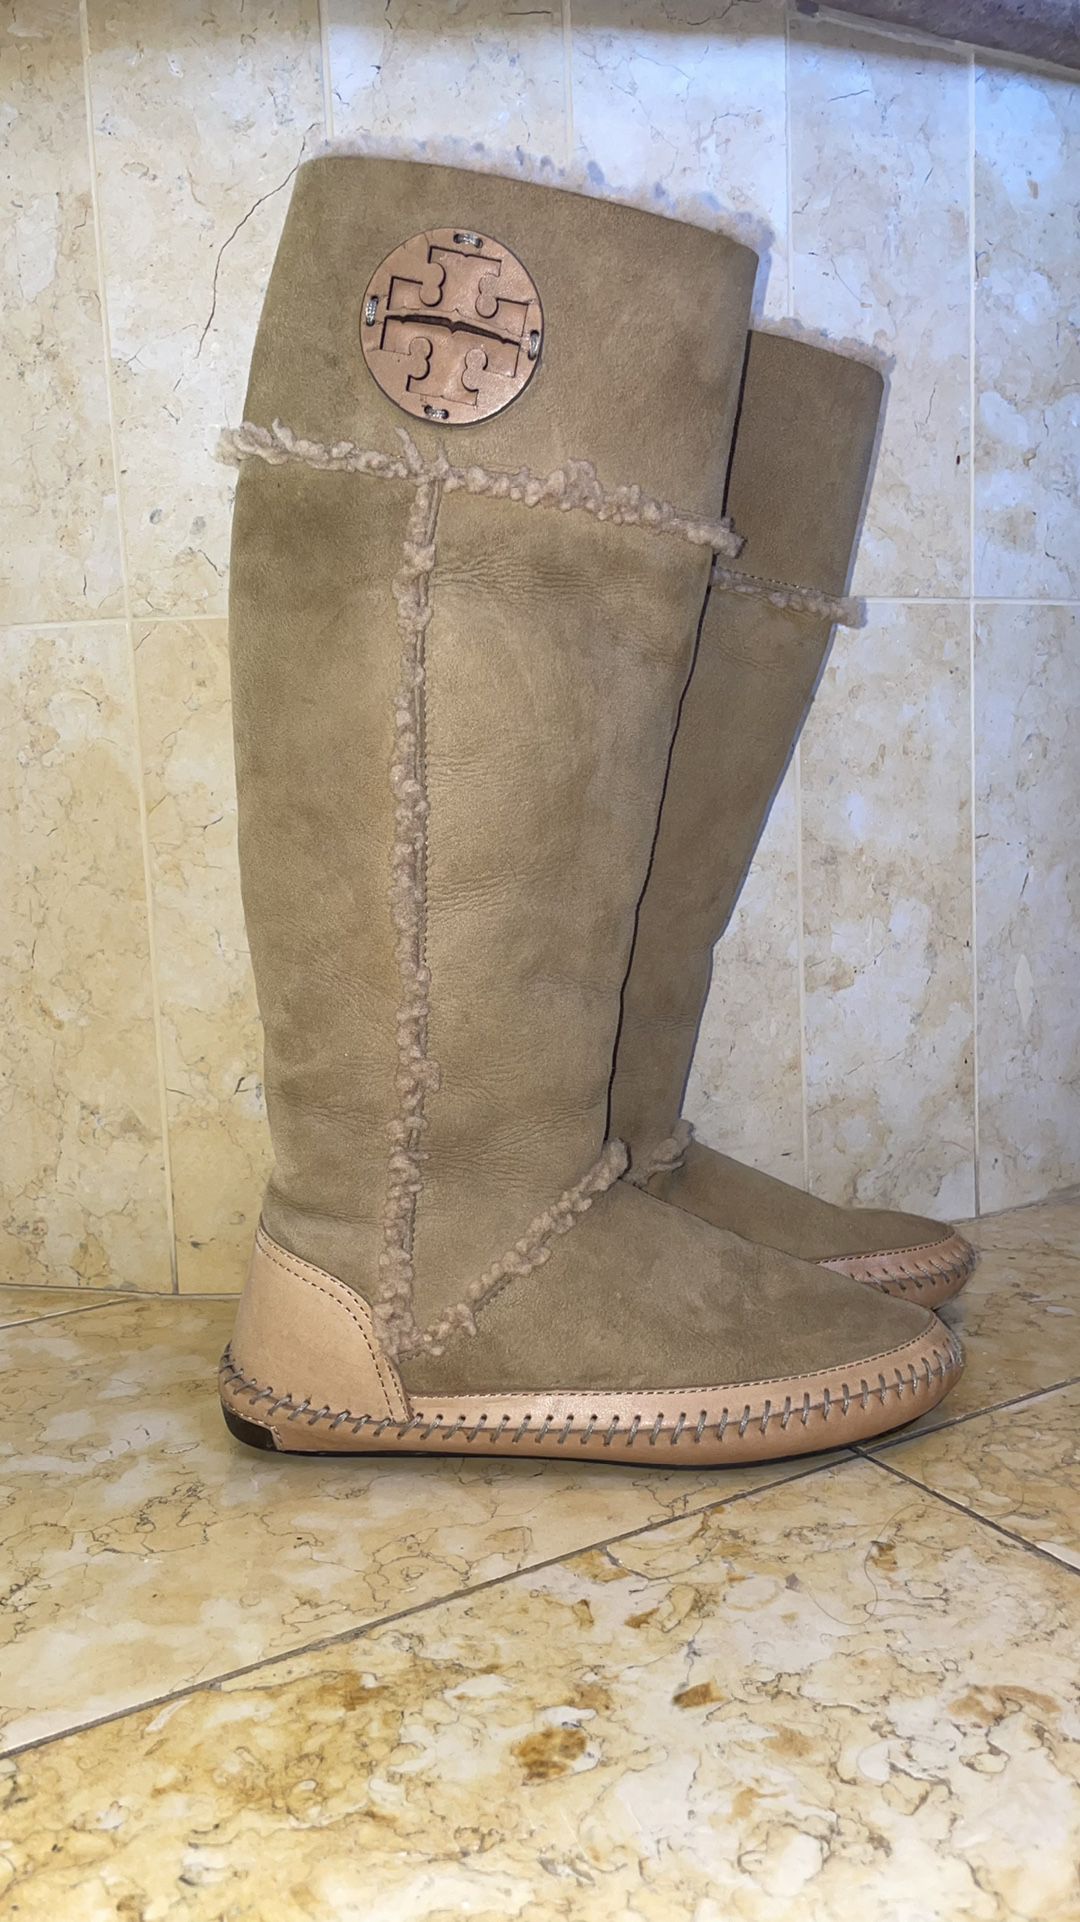 Tory Burch UGGS boots for Sale in Los Angeles, CA - OfferUp